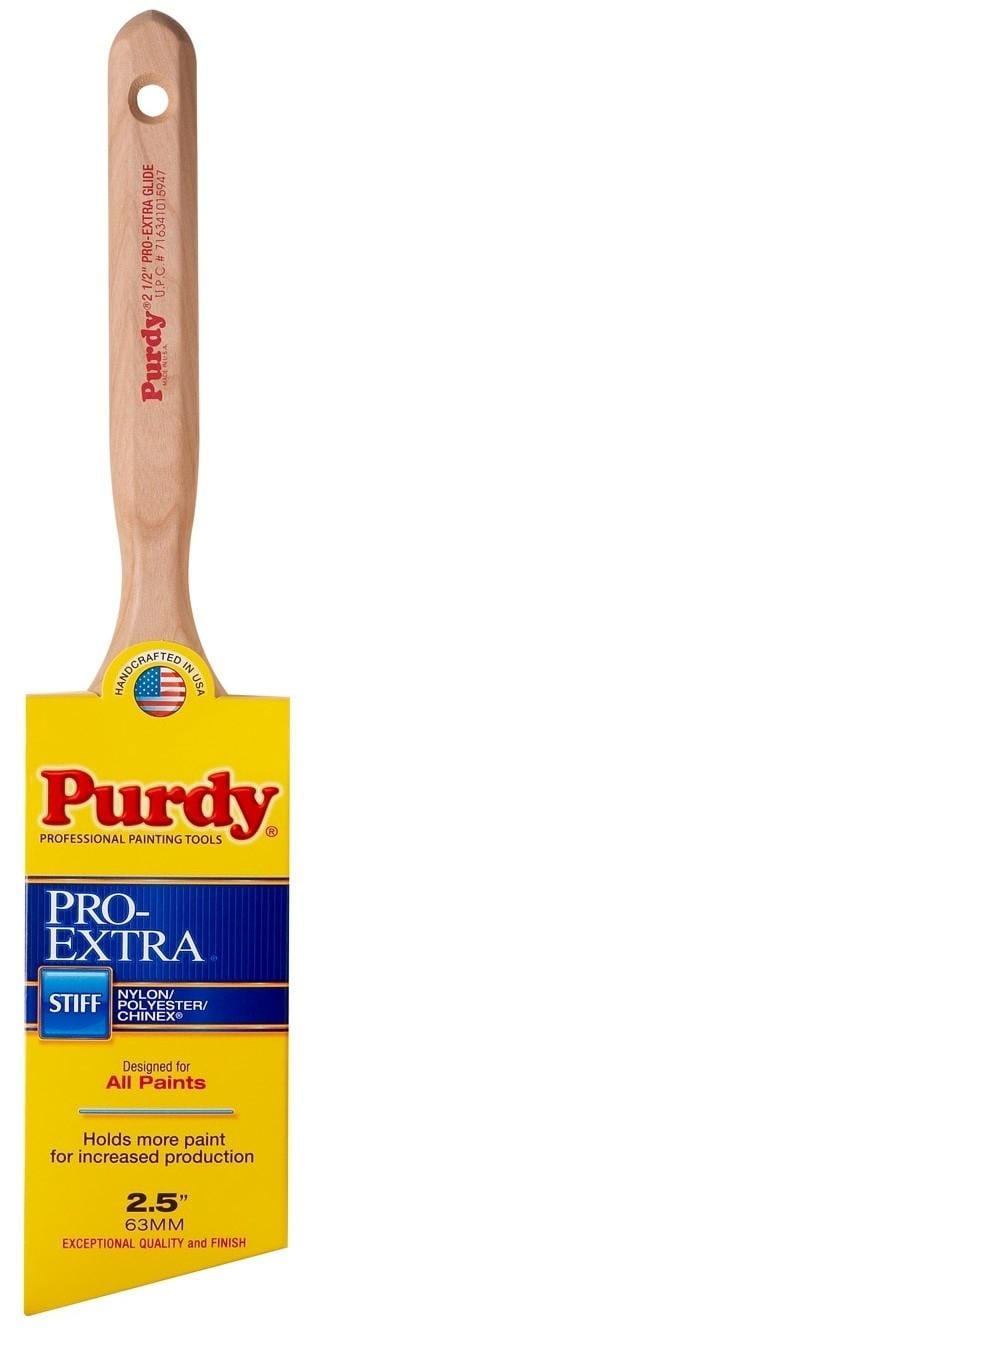 Purdy Pro-Extra Glide Nylon- Polyester Blend Angle 2-1/2-in Paint Brush | 144152725